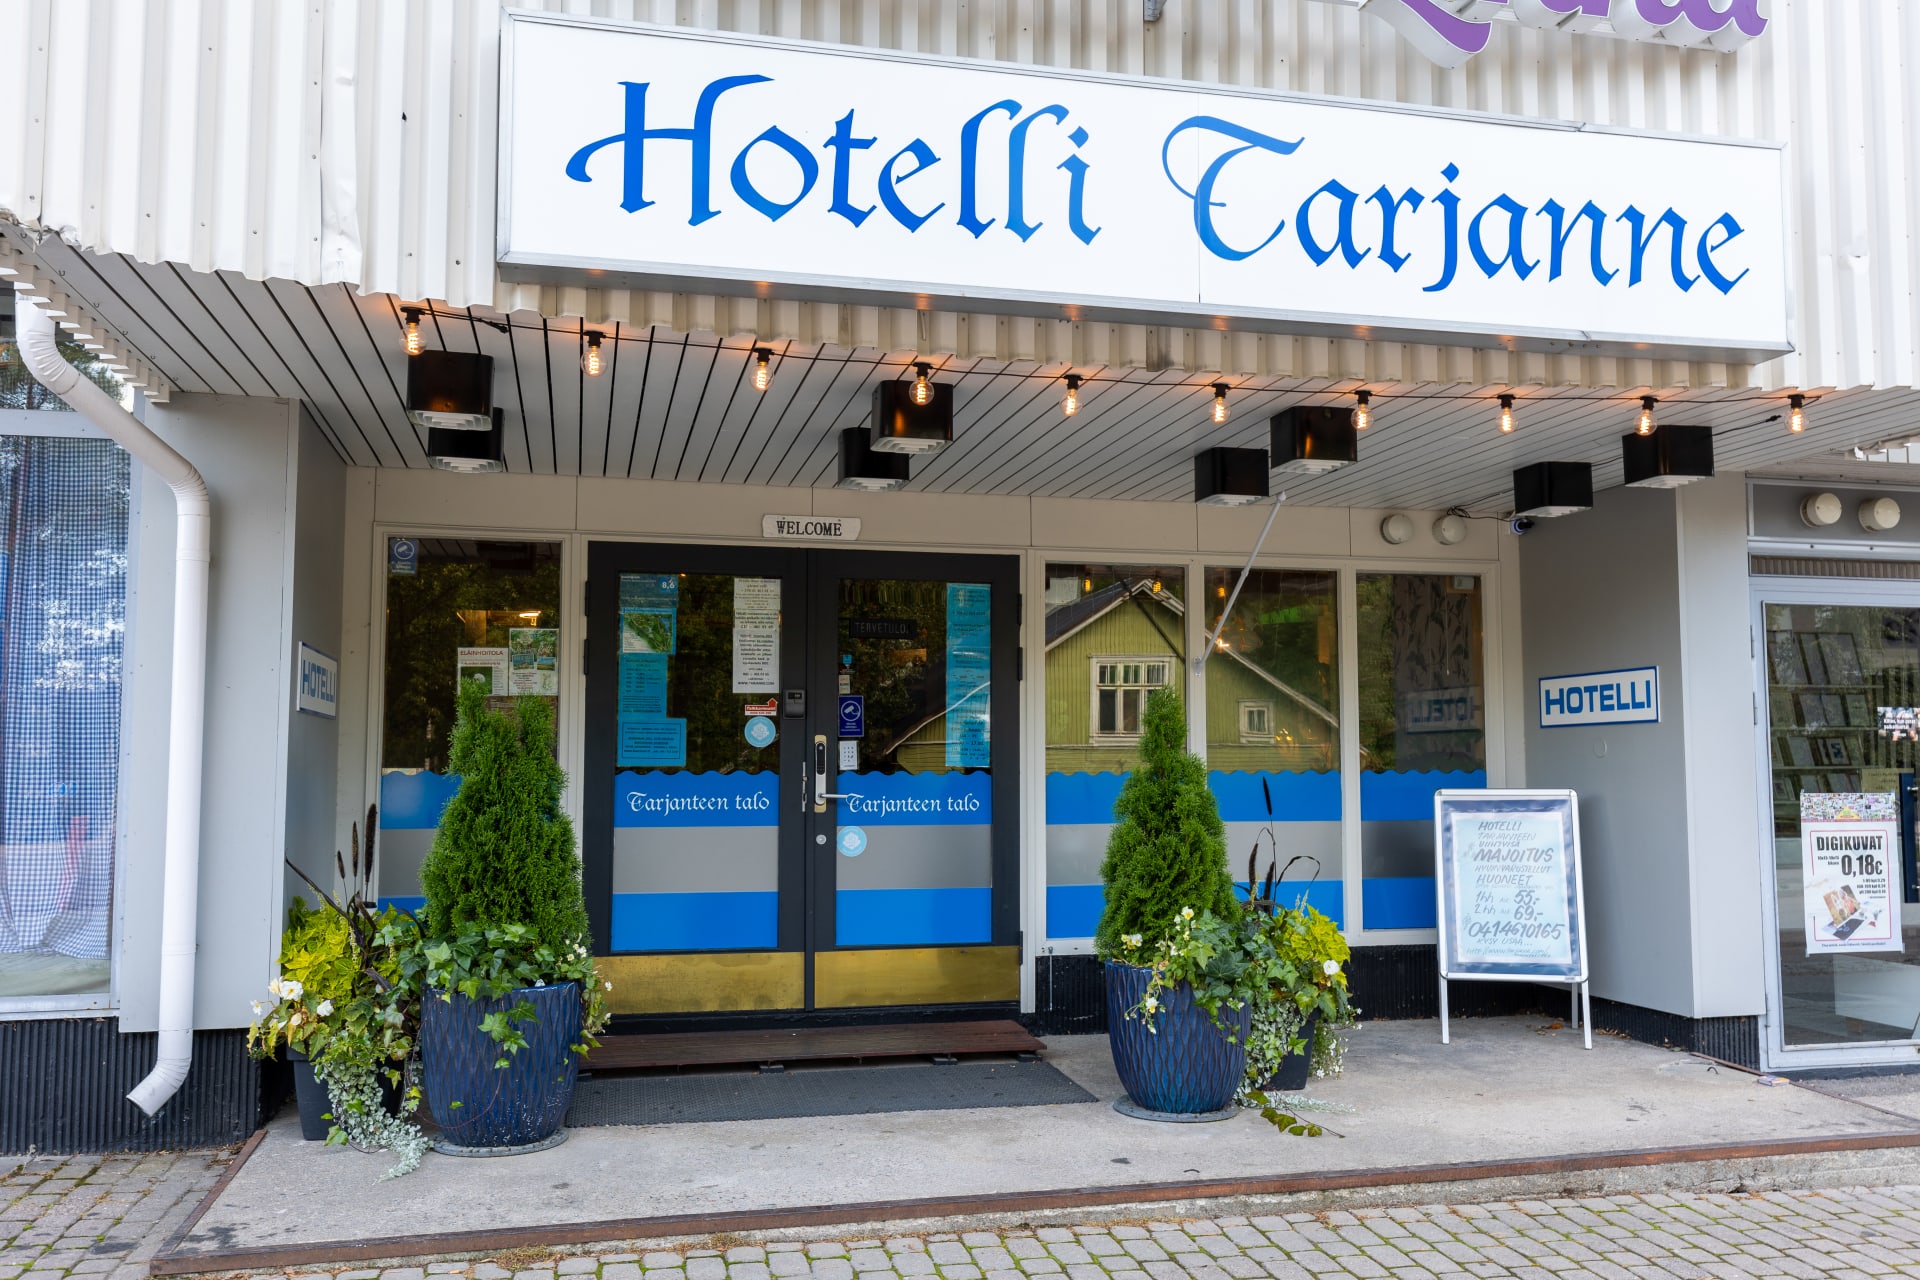 The main entrance of Hotel Tarjanne's accommodation.